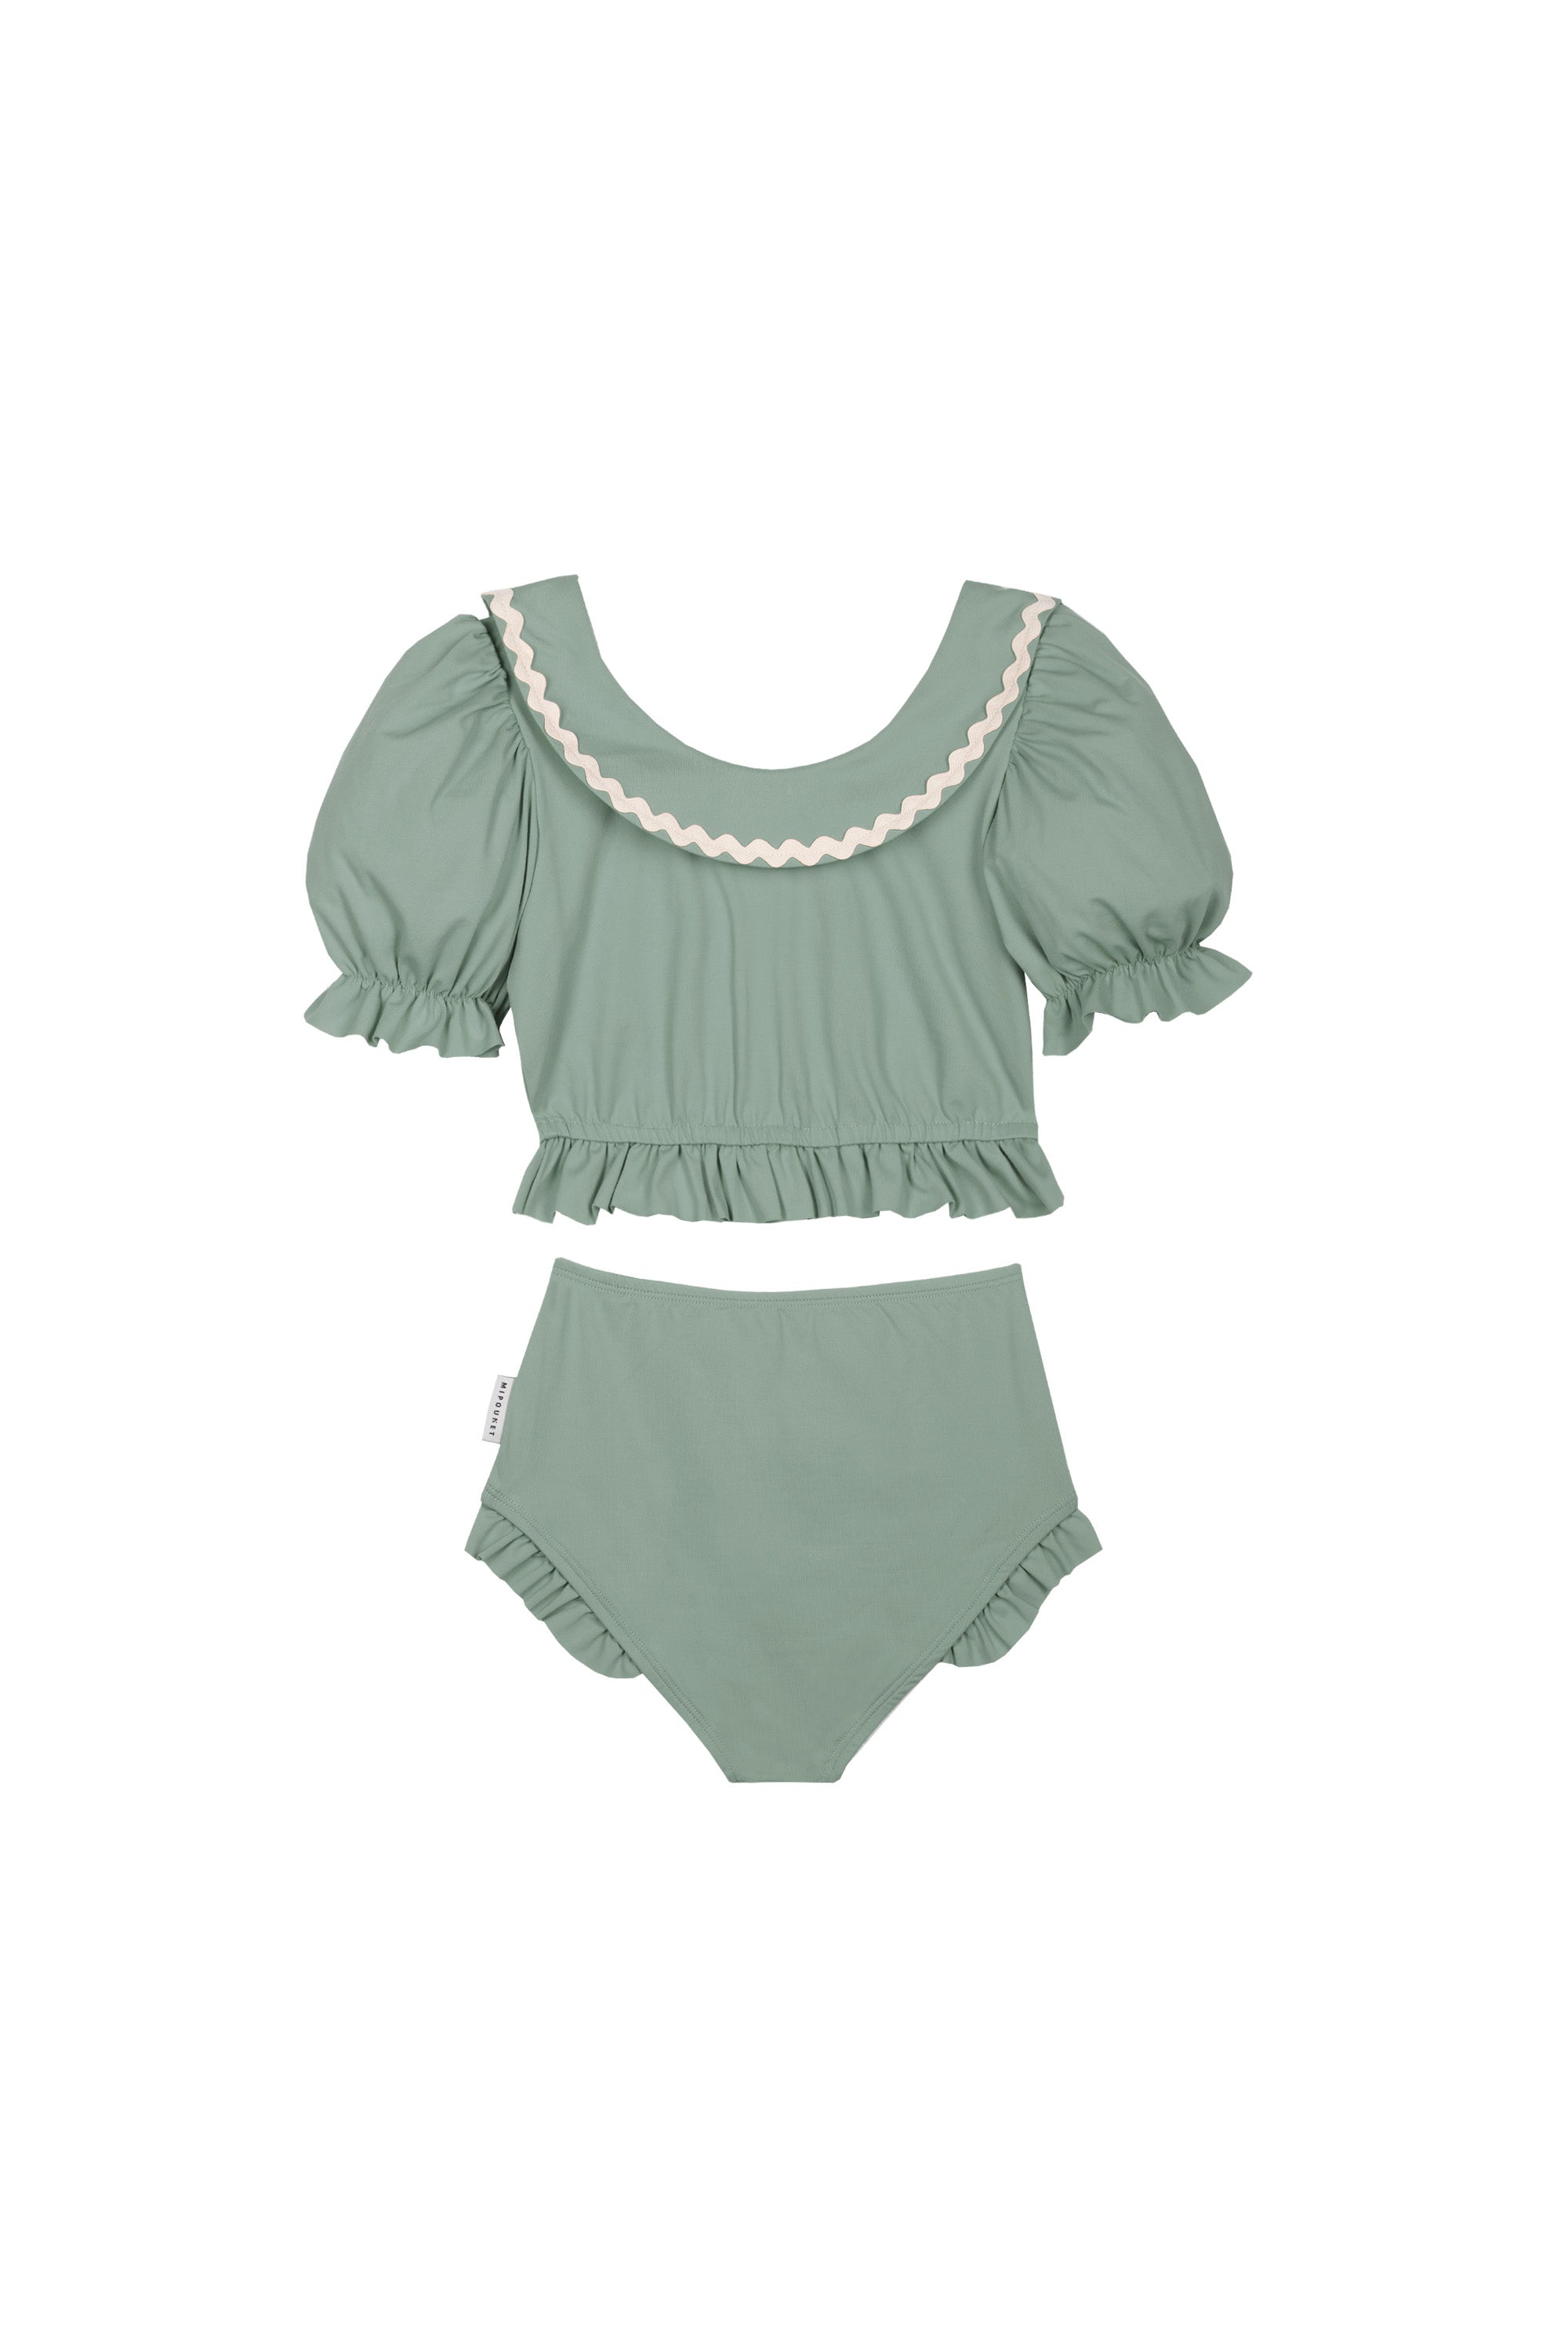 Mipounet - catalina collared swimsuit - musgo green